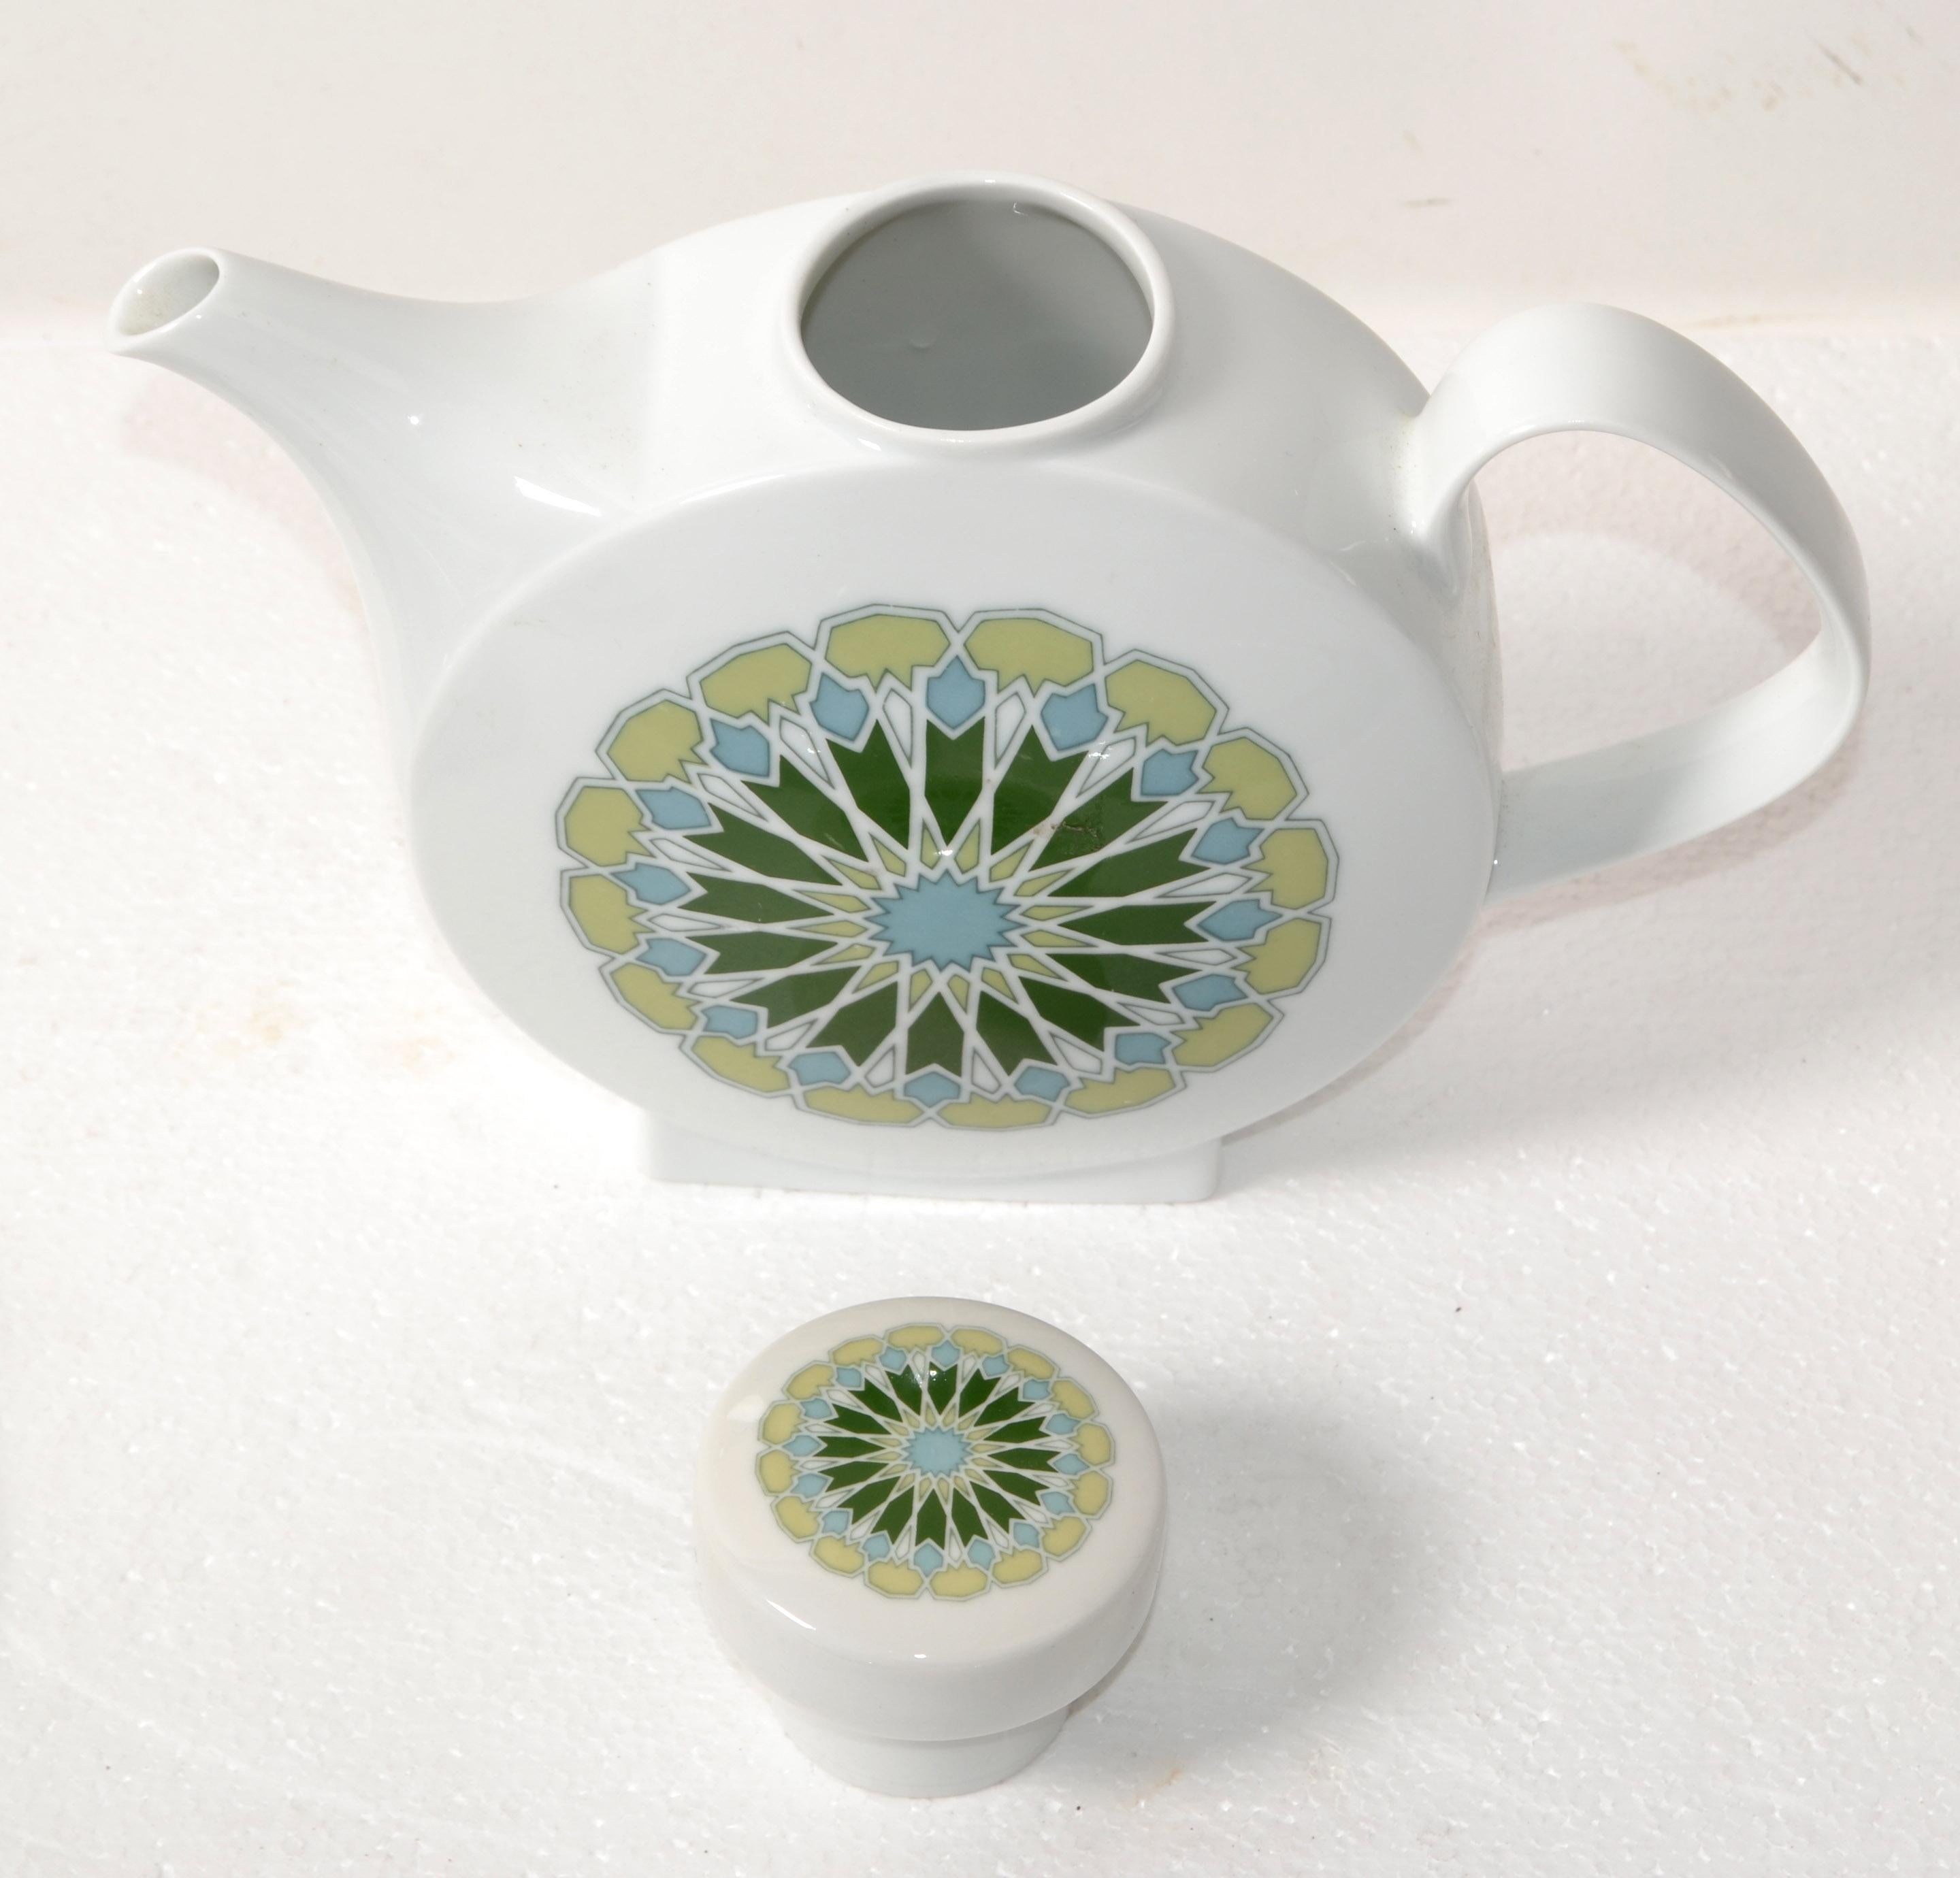 Vintage Melitta Minden Porcelain Tee Service Green White Motif 4 Place Setting In Good Condition For Sale In Miami, FL